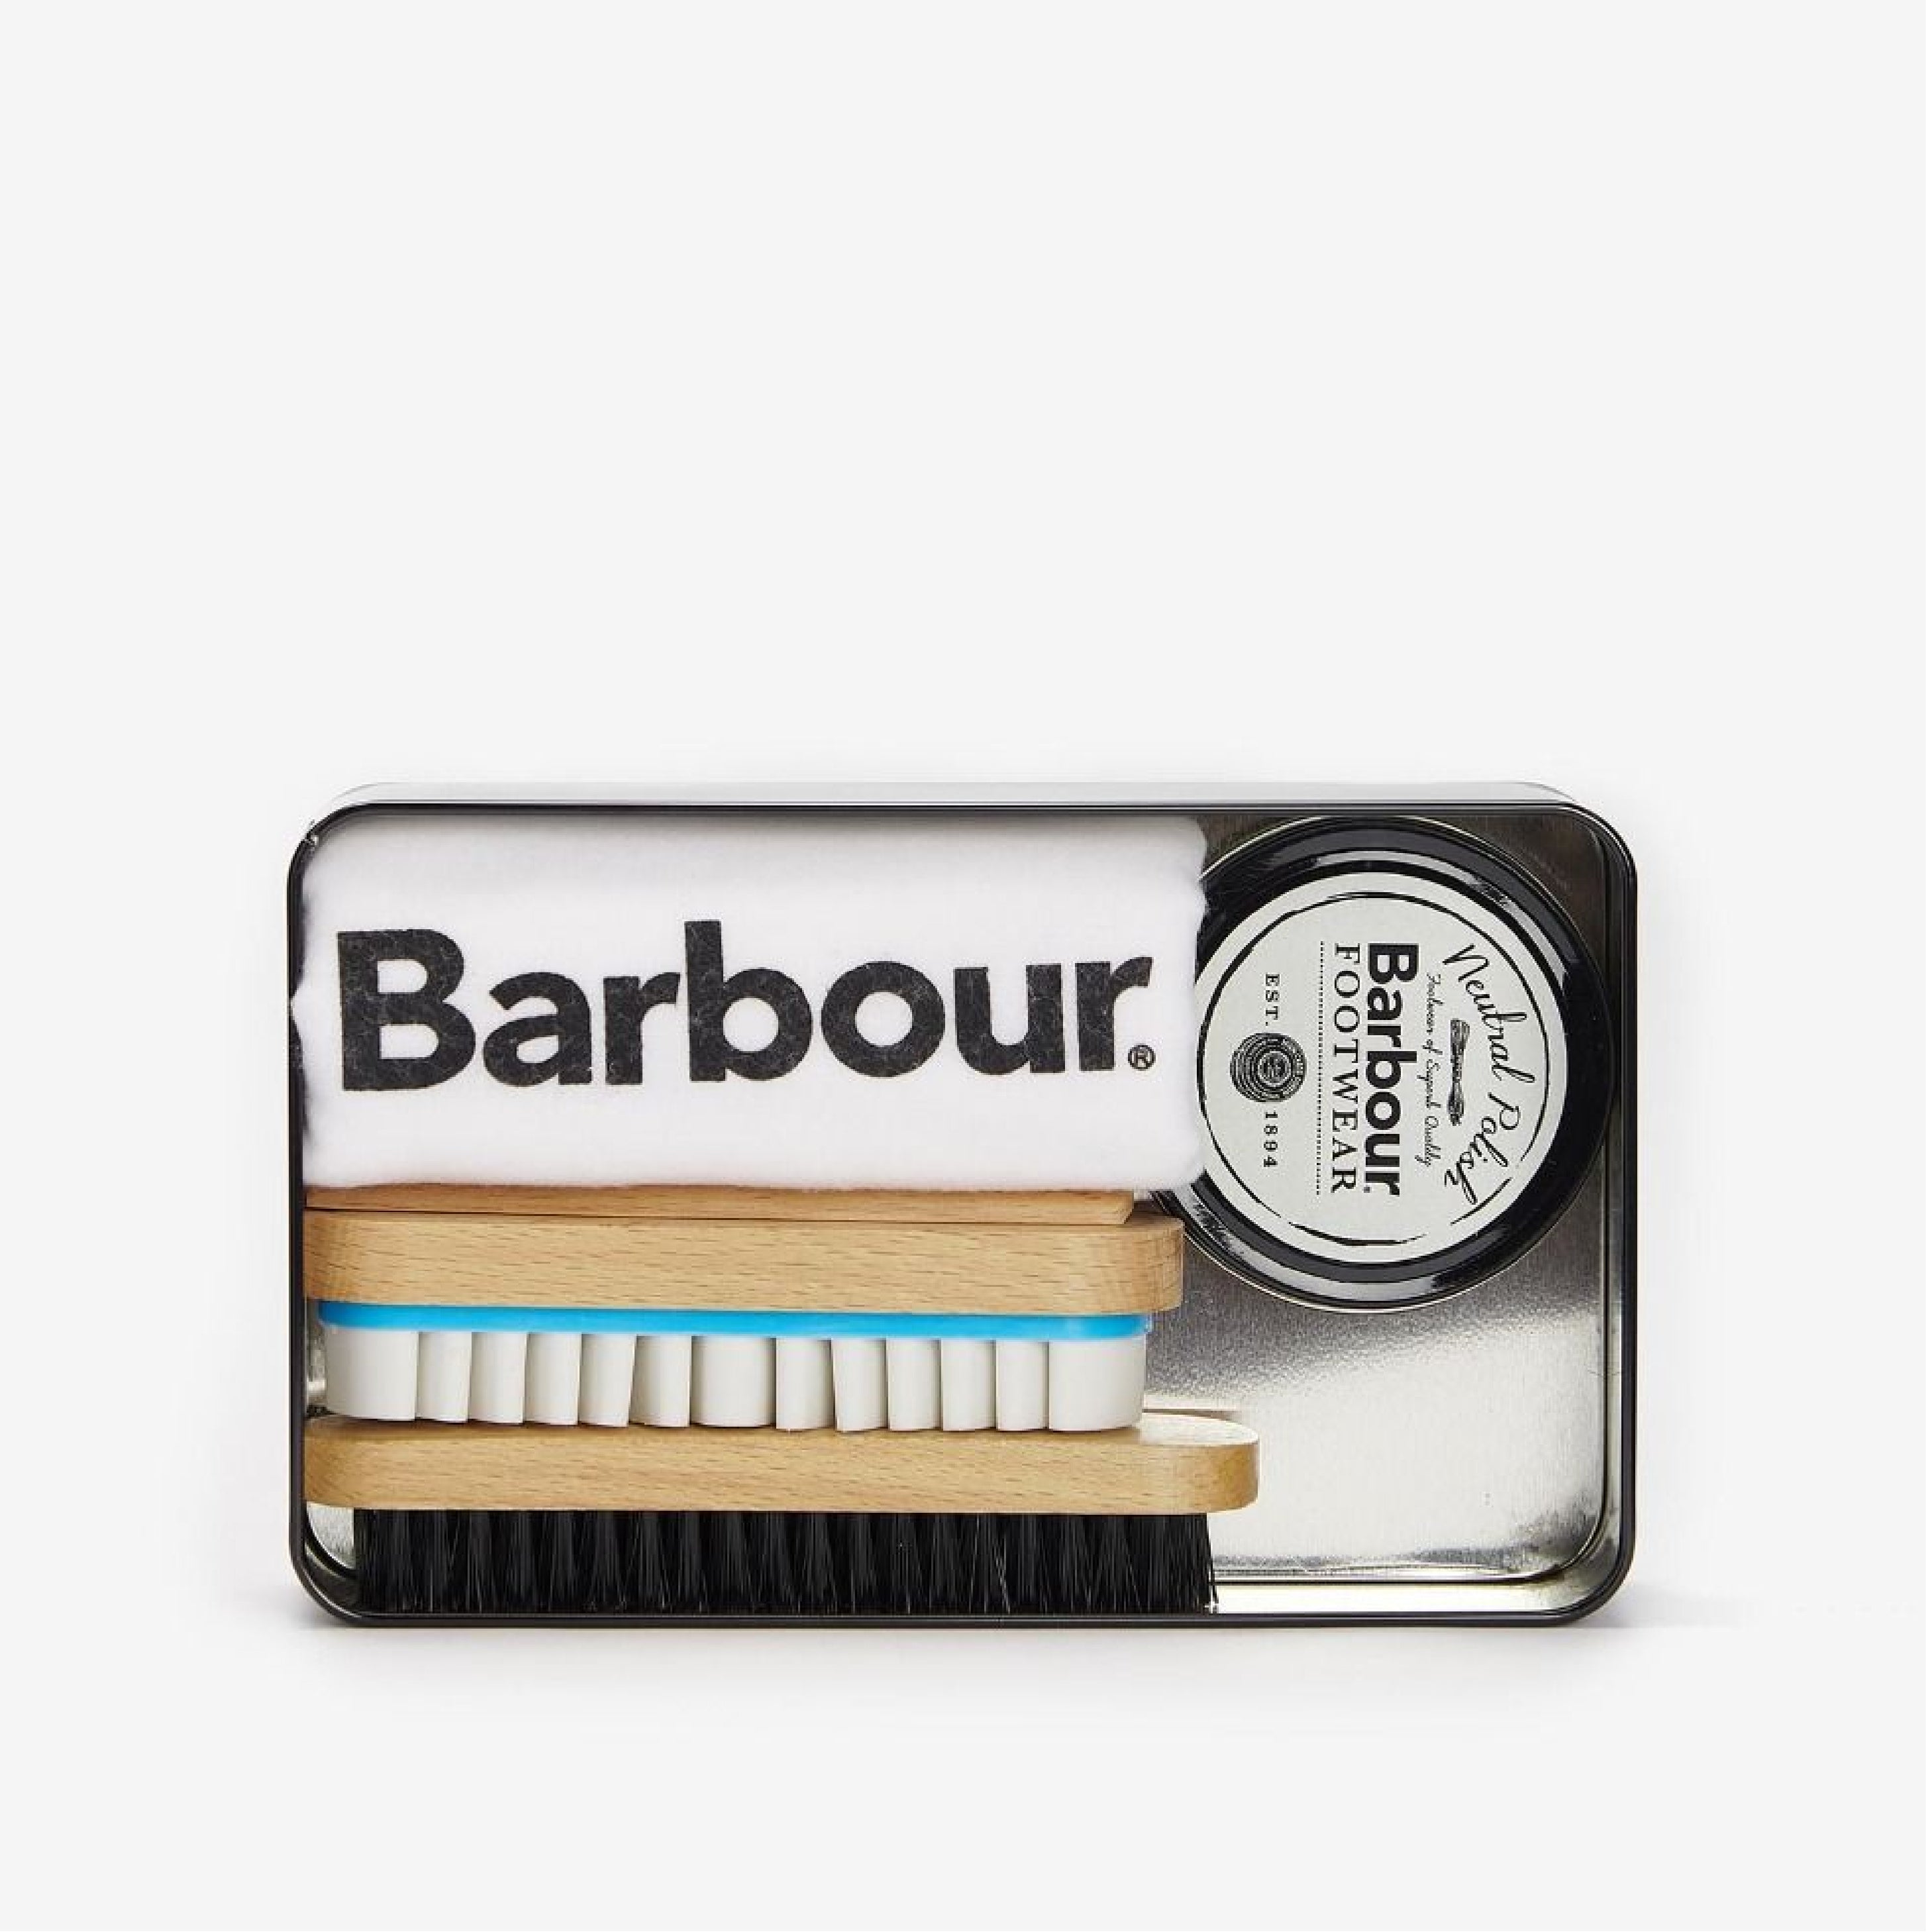 Barbour Boot Care Kit Multi